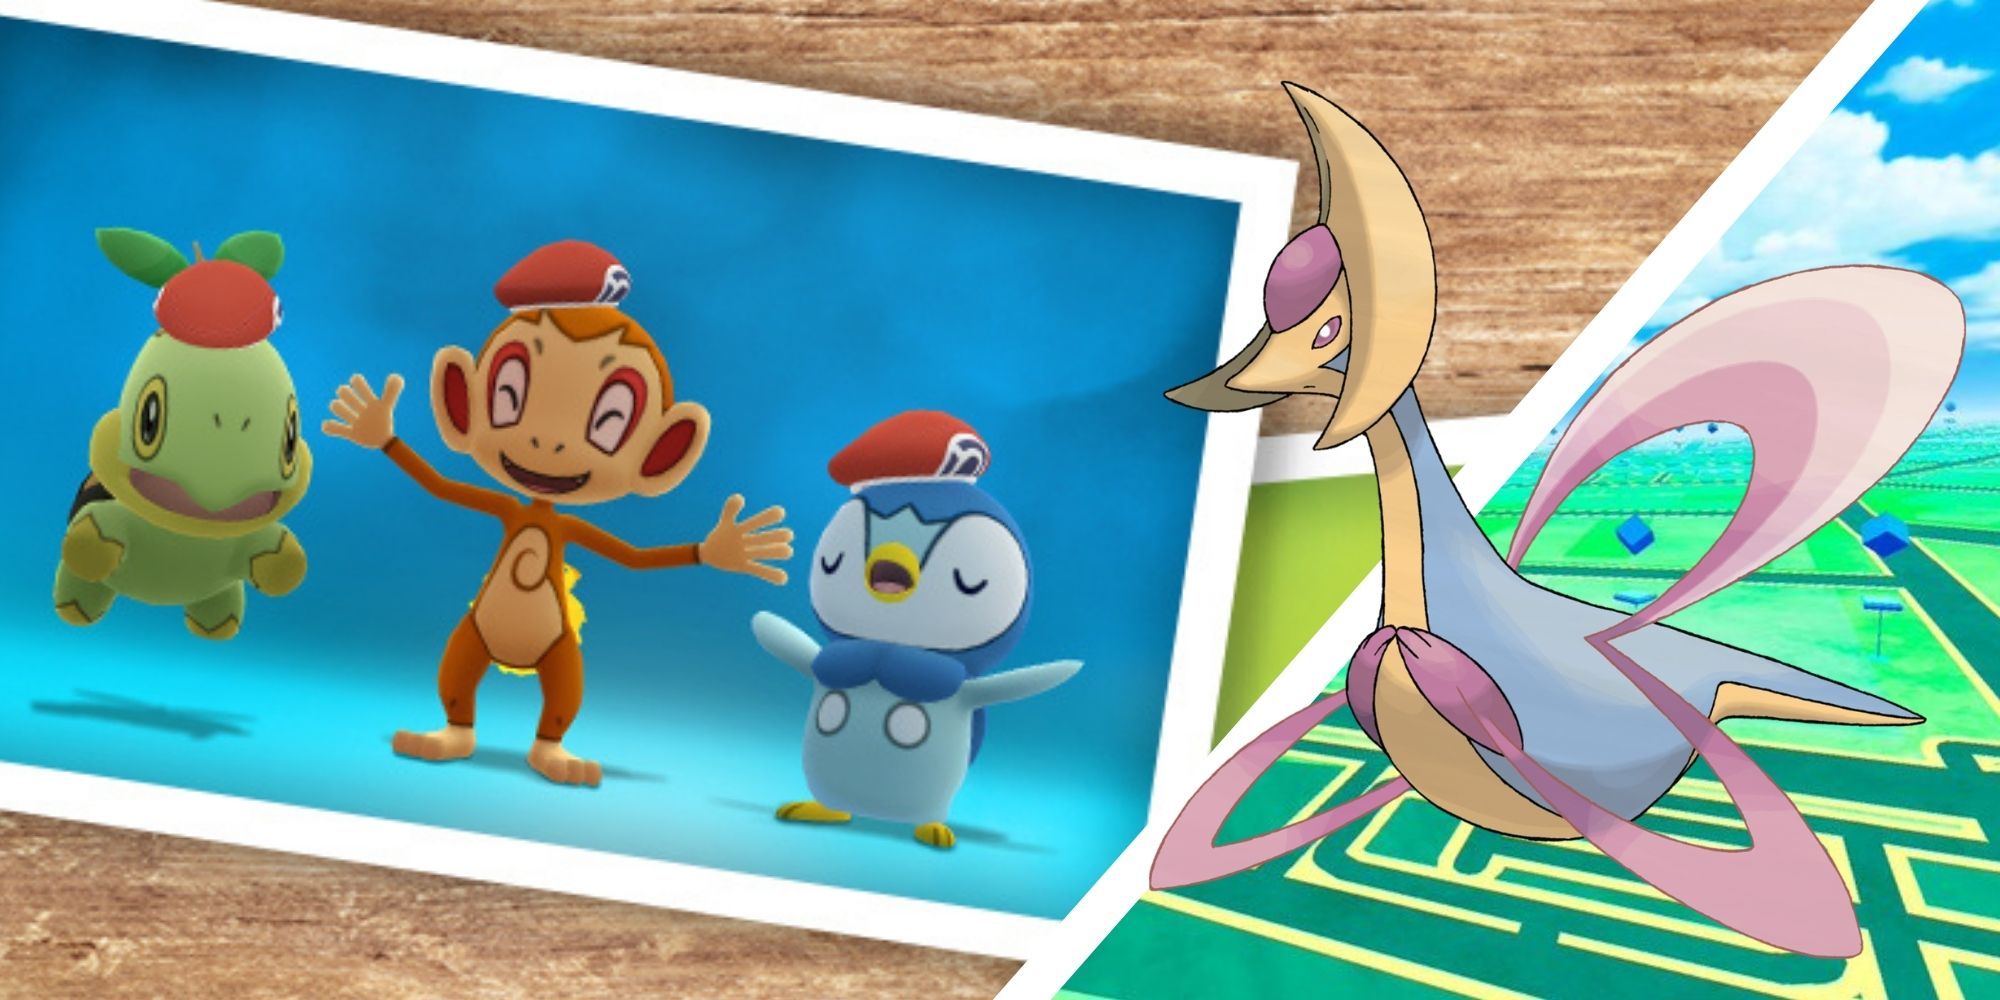 This Week In Pokemon Go Brilliant Diamond & Shining Pearl New Rocket Lineups And More